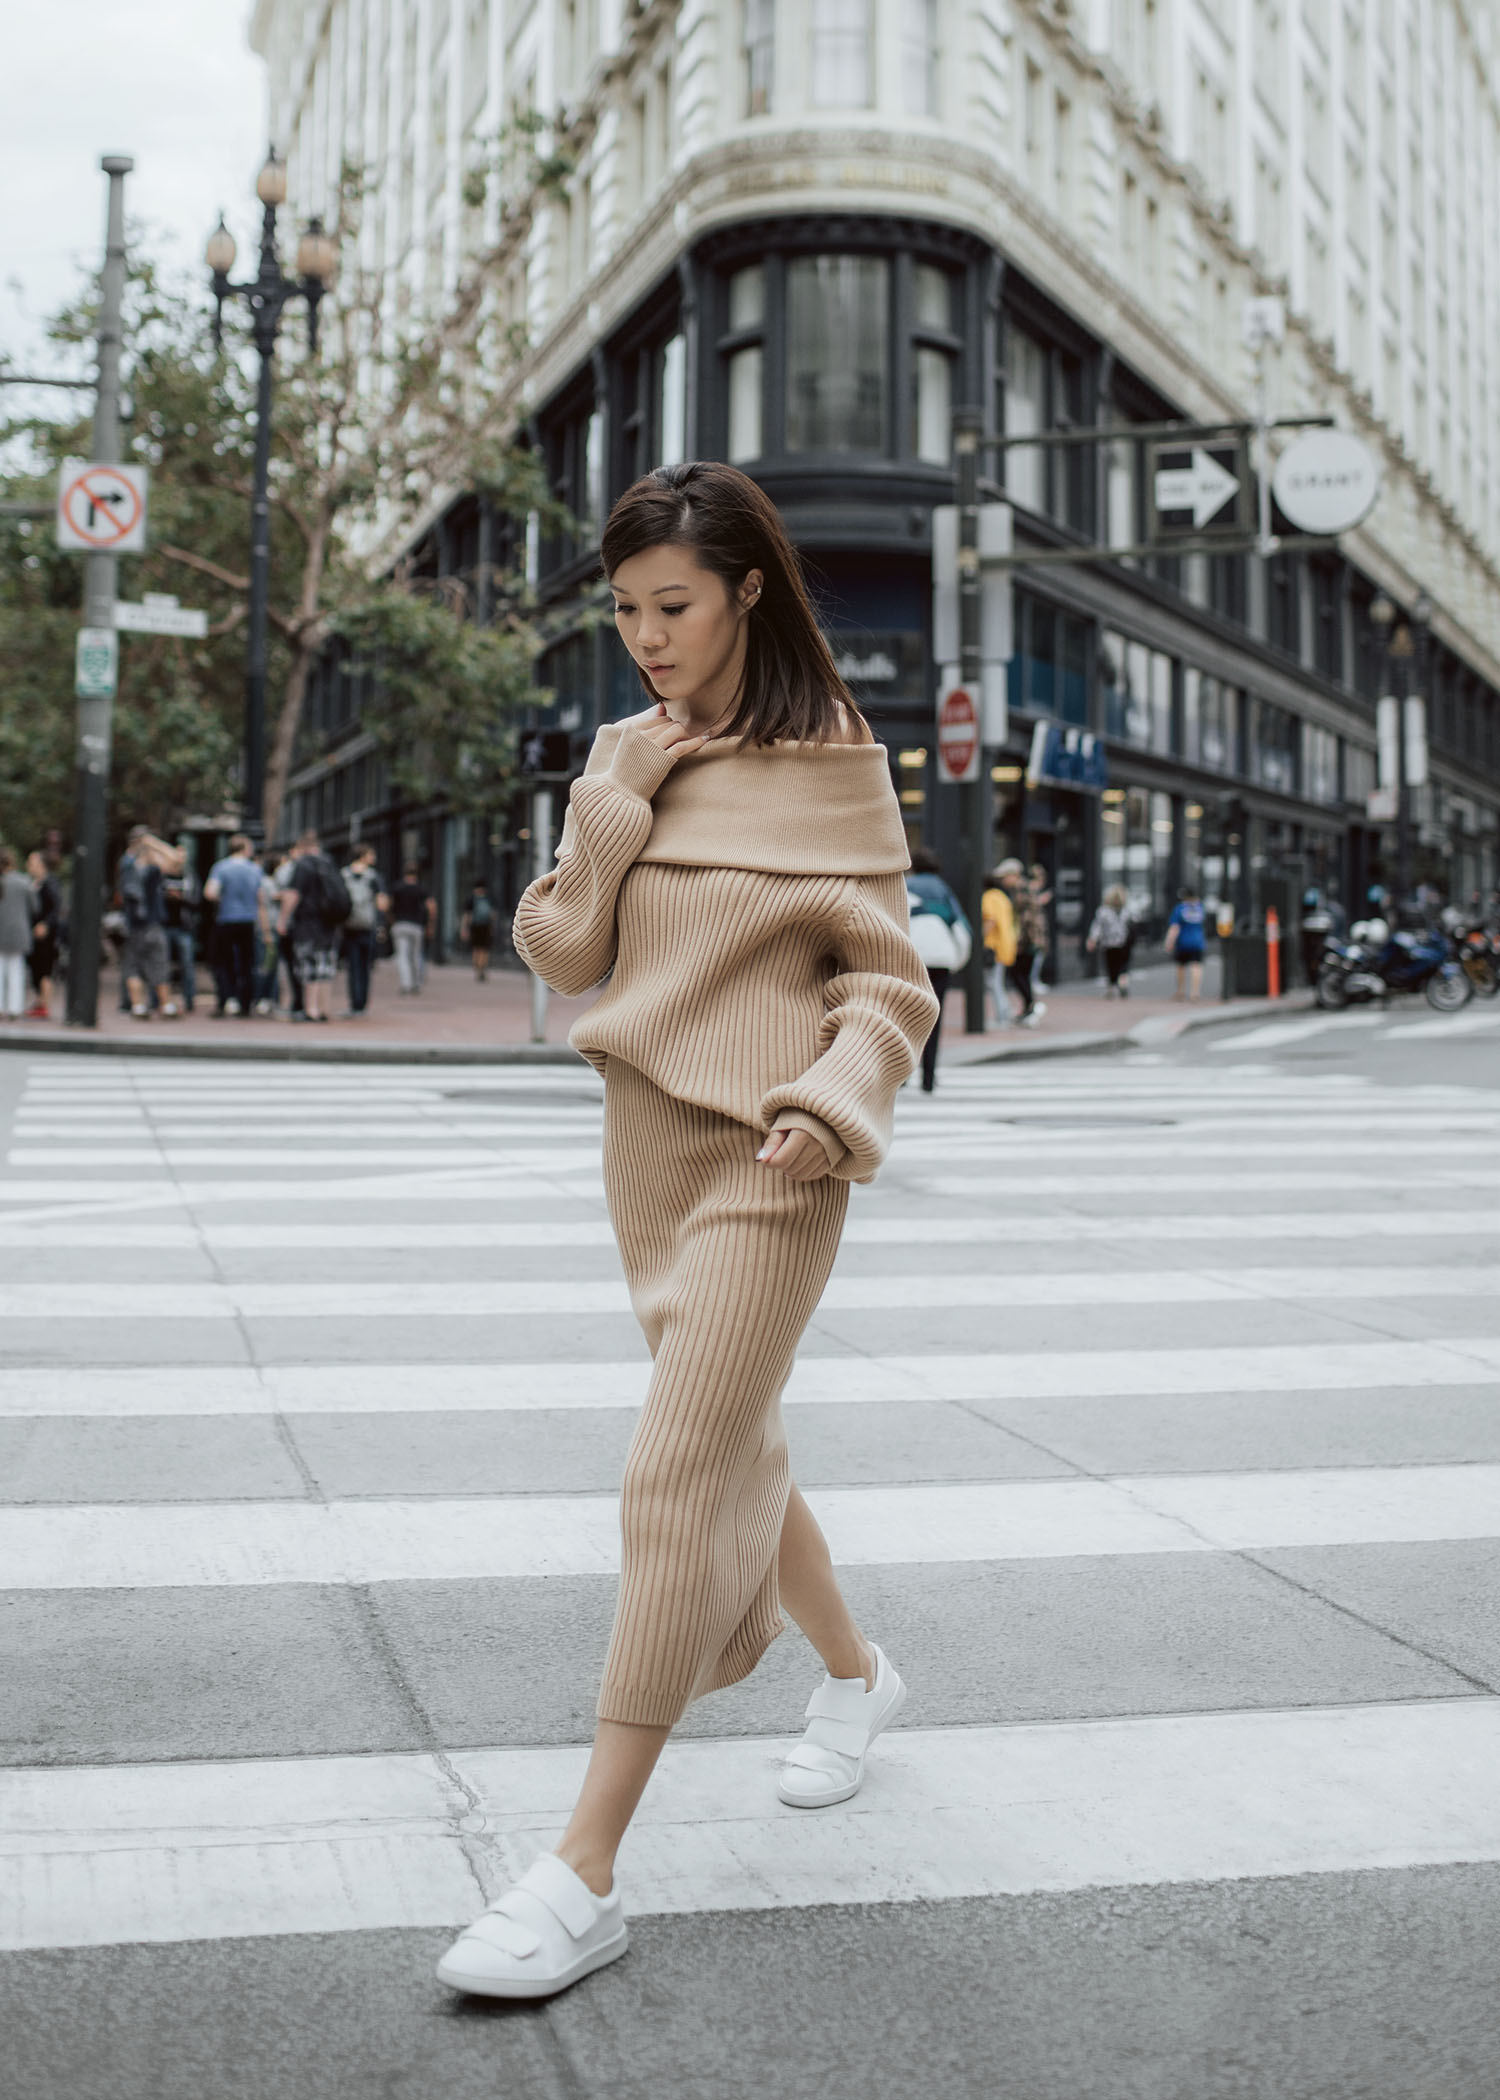 byTSANG season II knitted off shoulder sweater and skirt in biscotti khaki ribbed knit